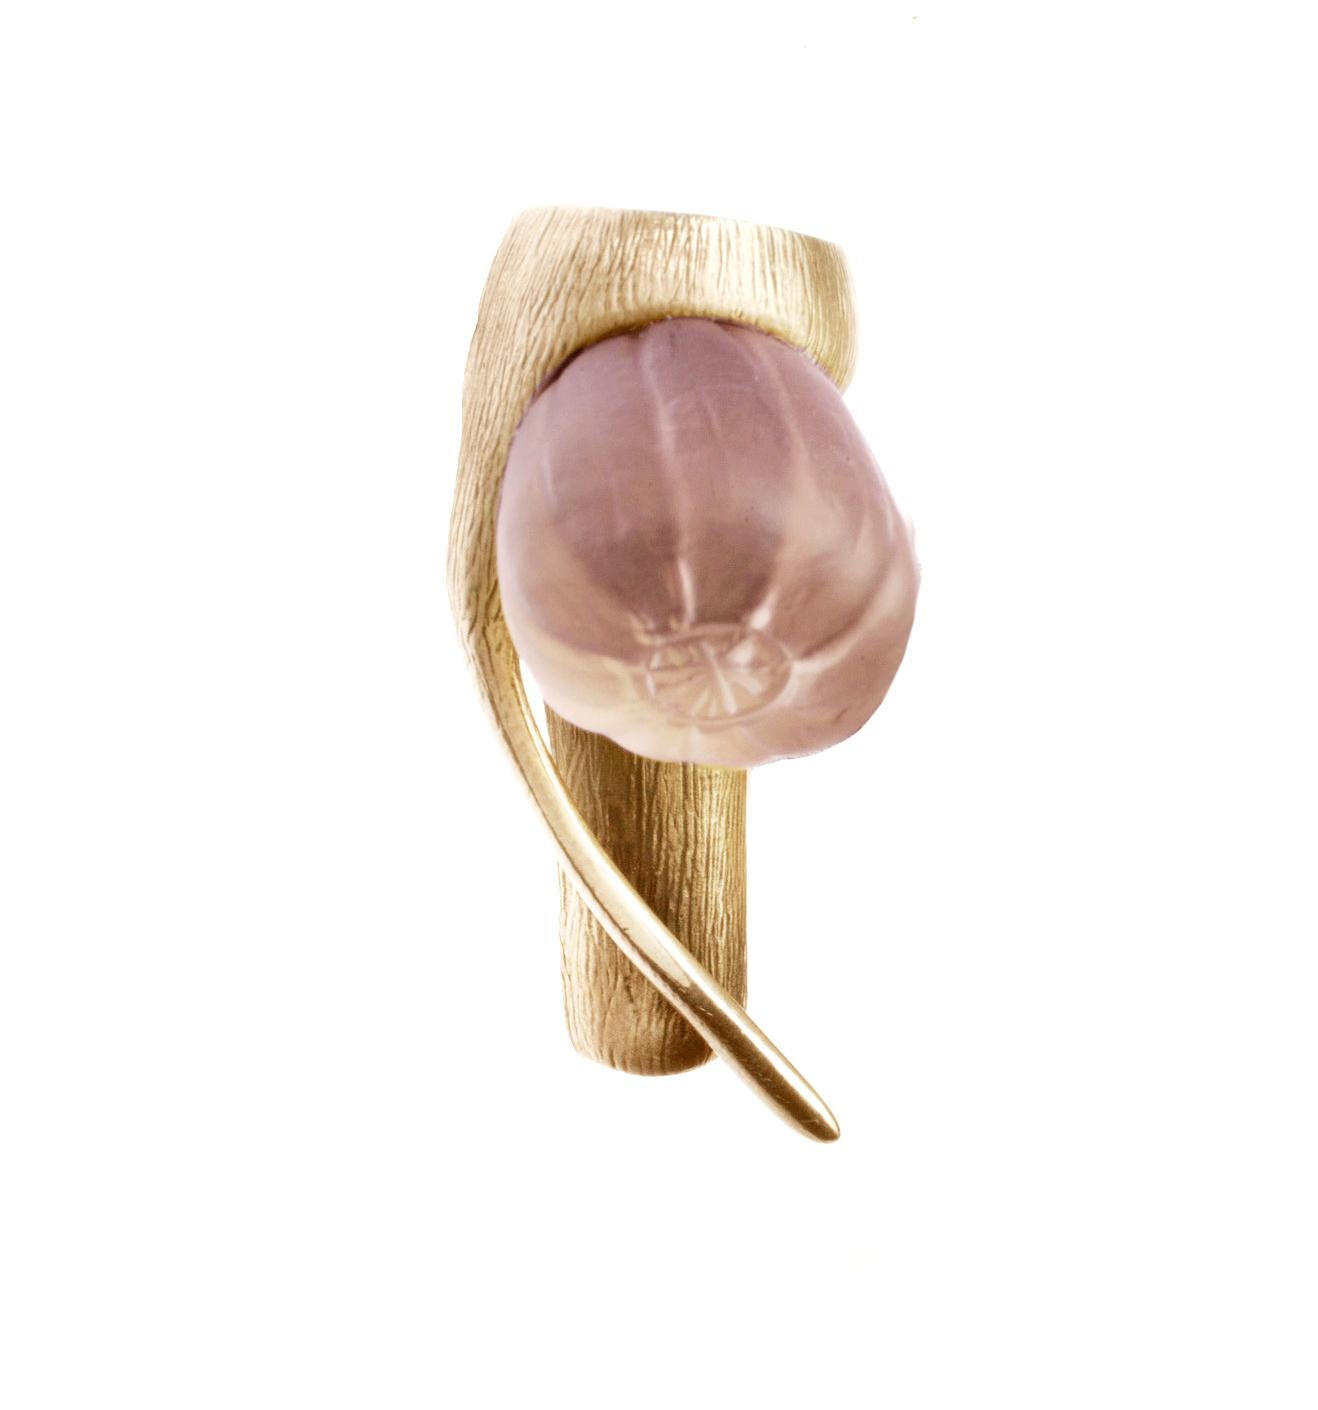 This brooch is a perfect accessory for the fall season, adding a touch of elegance and sophistication to any outfit. The frosted rose quartz adds a delicate and feminine touch to the bold and unique design of the fig fruit. The use of 18 karat rose